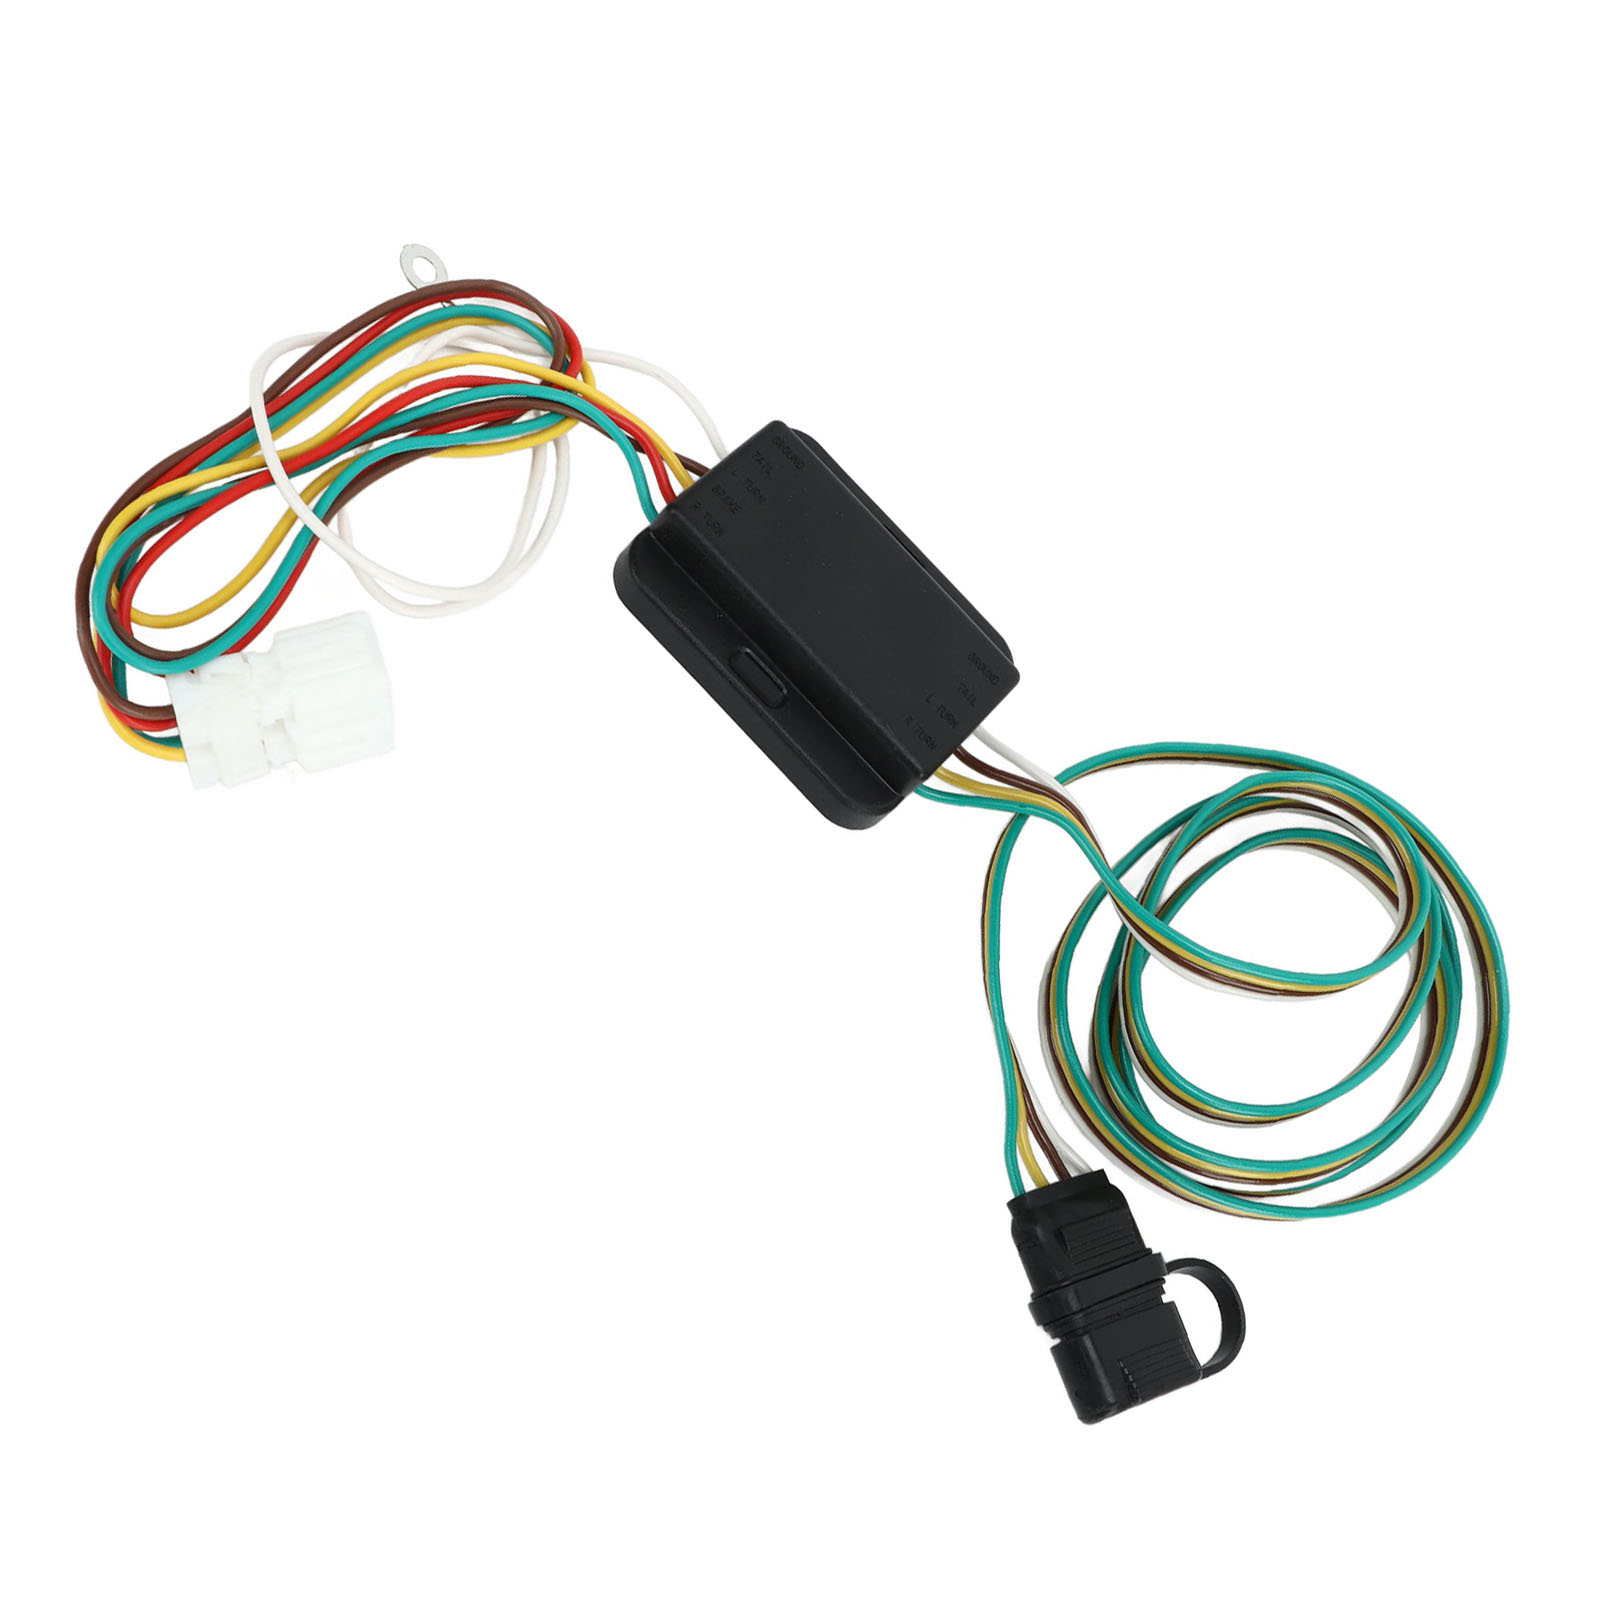 Trailer Wiring Connector, Reliable Performance Trailer Wiring Harness Safe  Connection 55106 With Dust Cover For CR-V 2007-2011 Walmart Canada